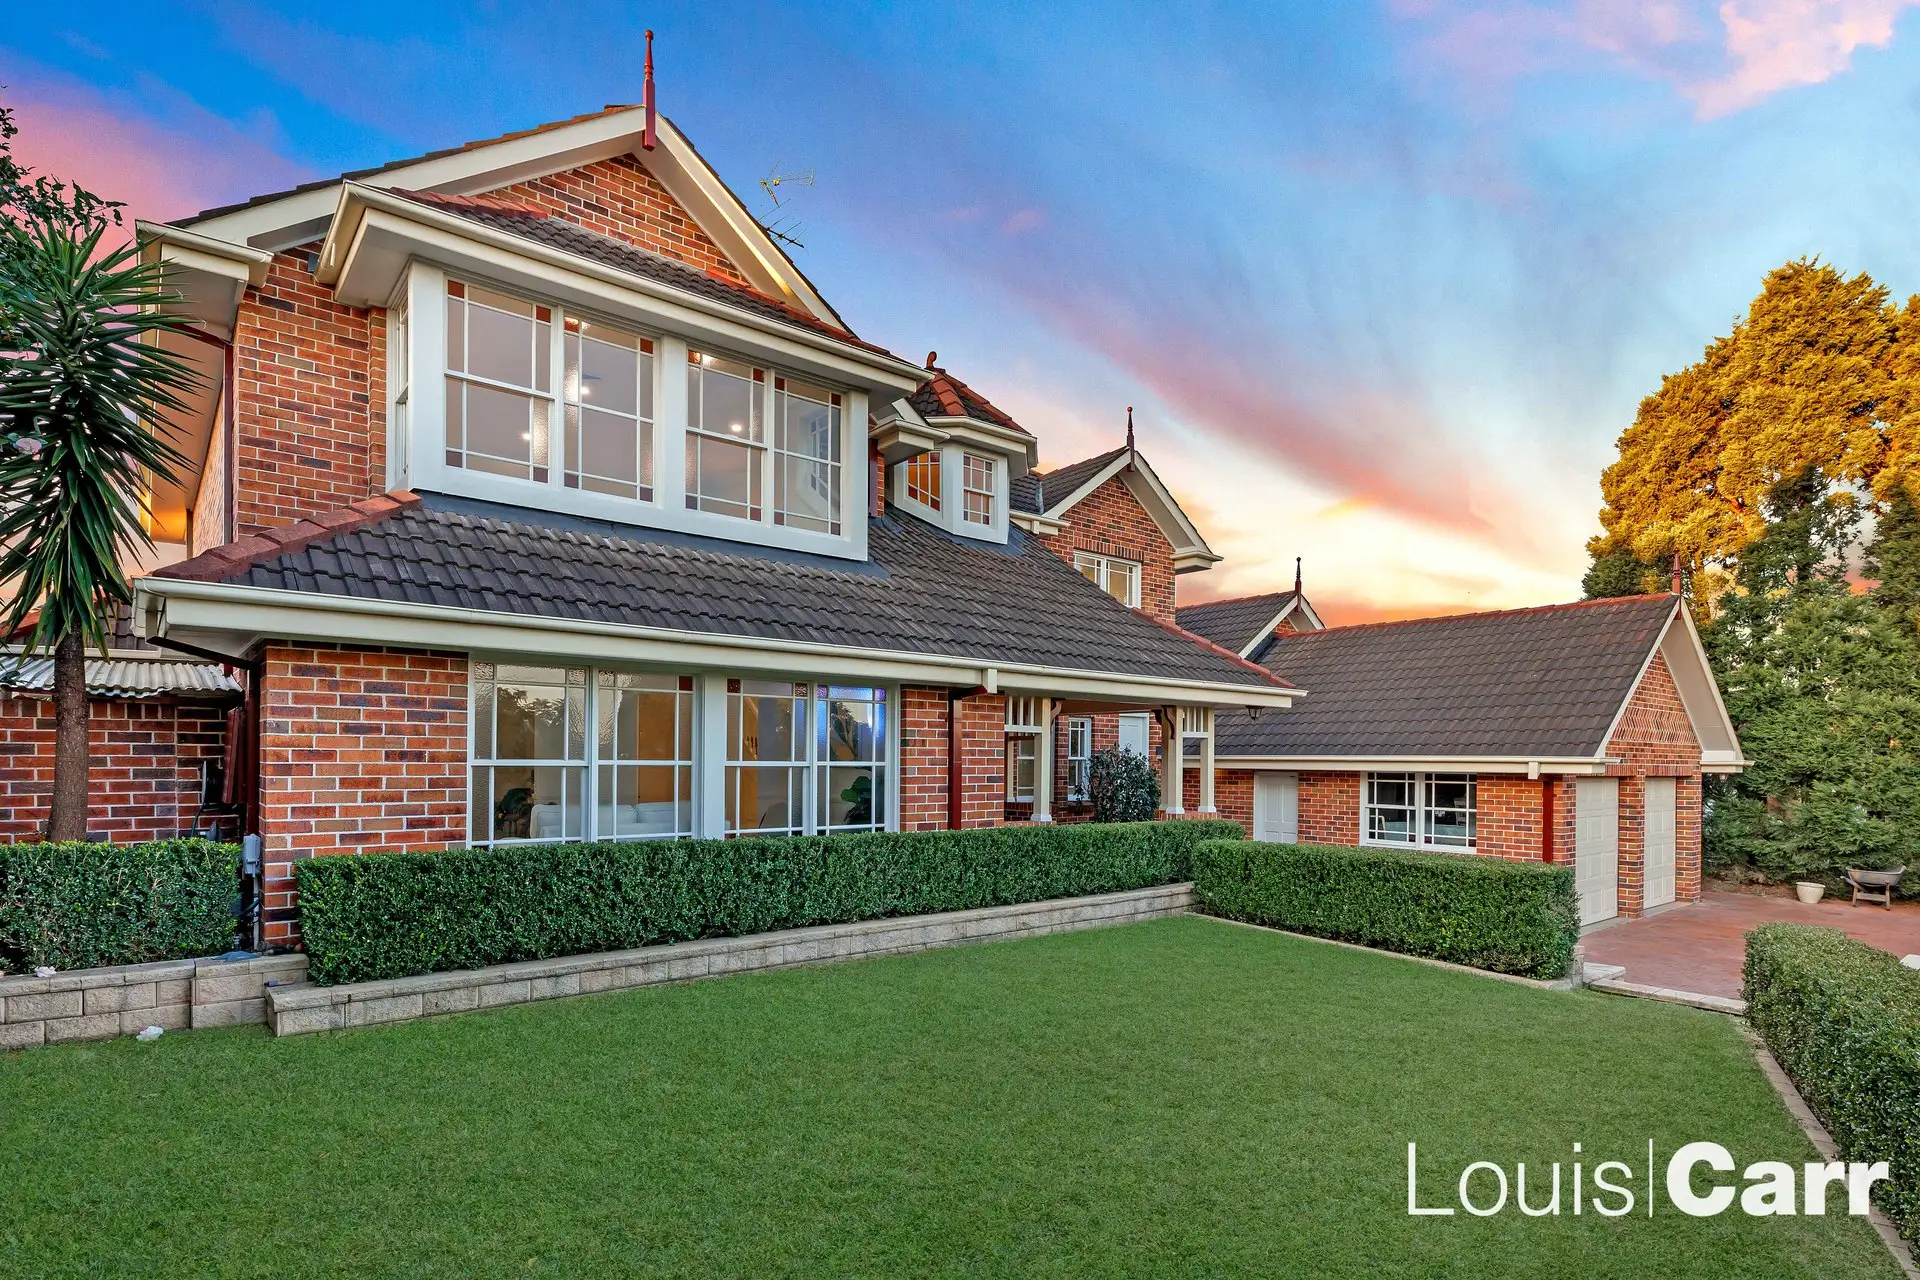 Photo #2: 66 Yaringa Road, Castle Hill - Sold by Louis Carr Real Estate